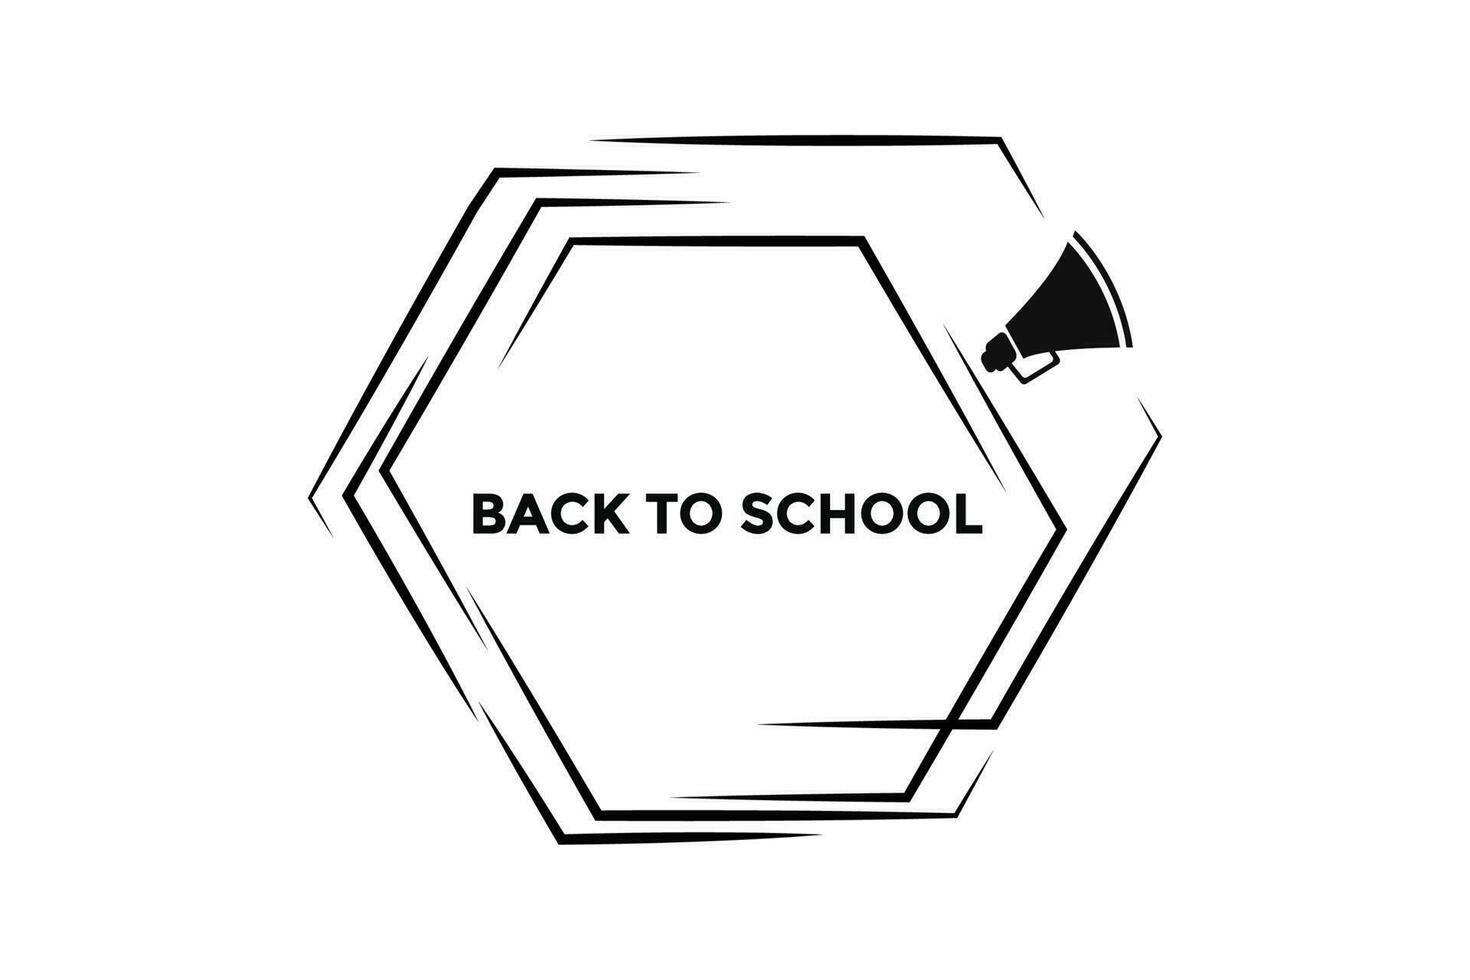 Back to school button web banner templates. Vector Illustration